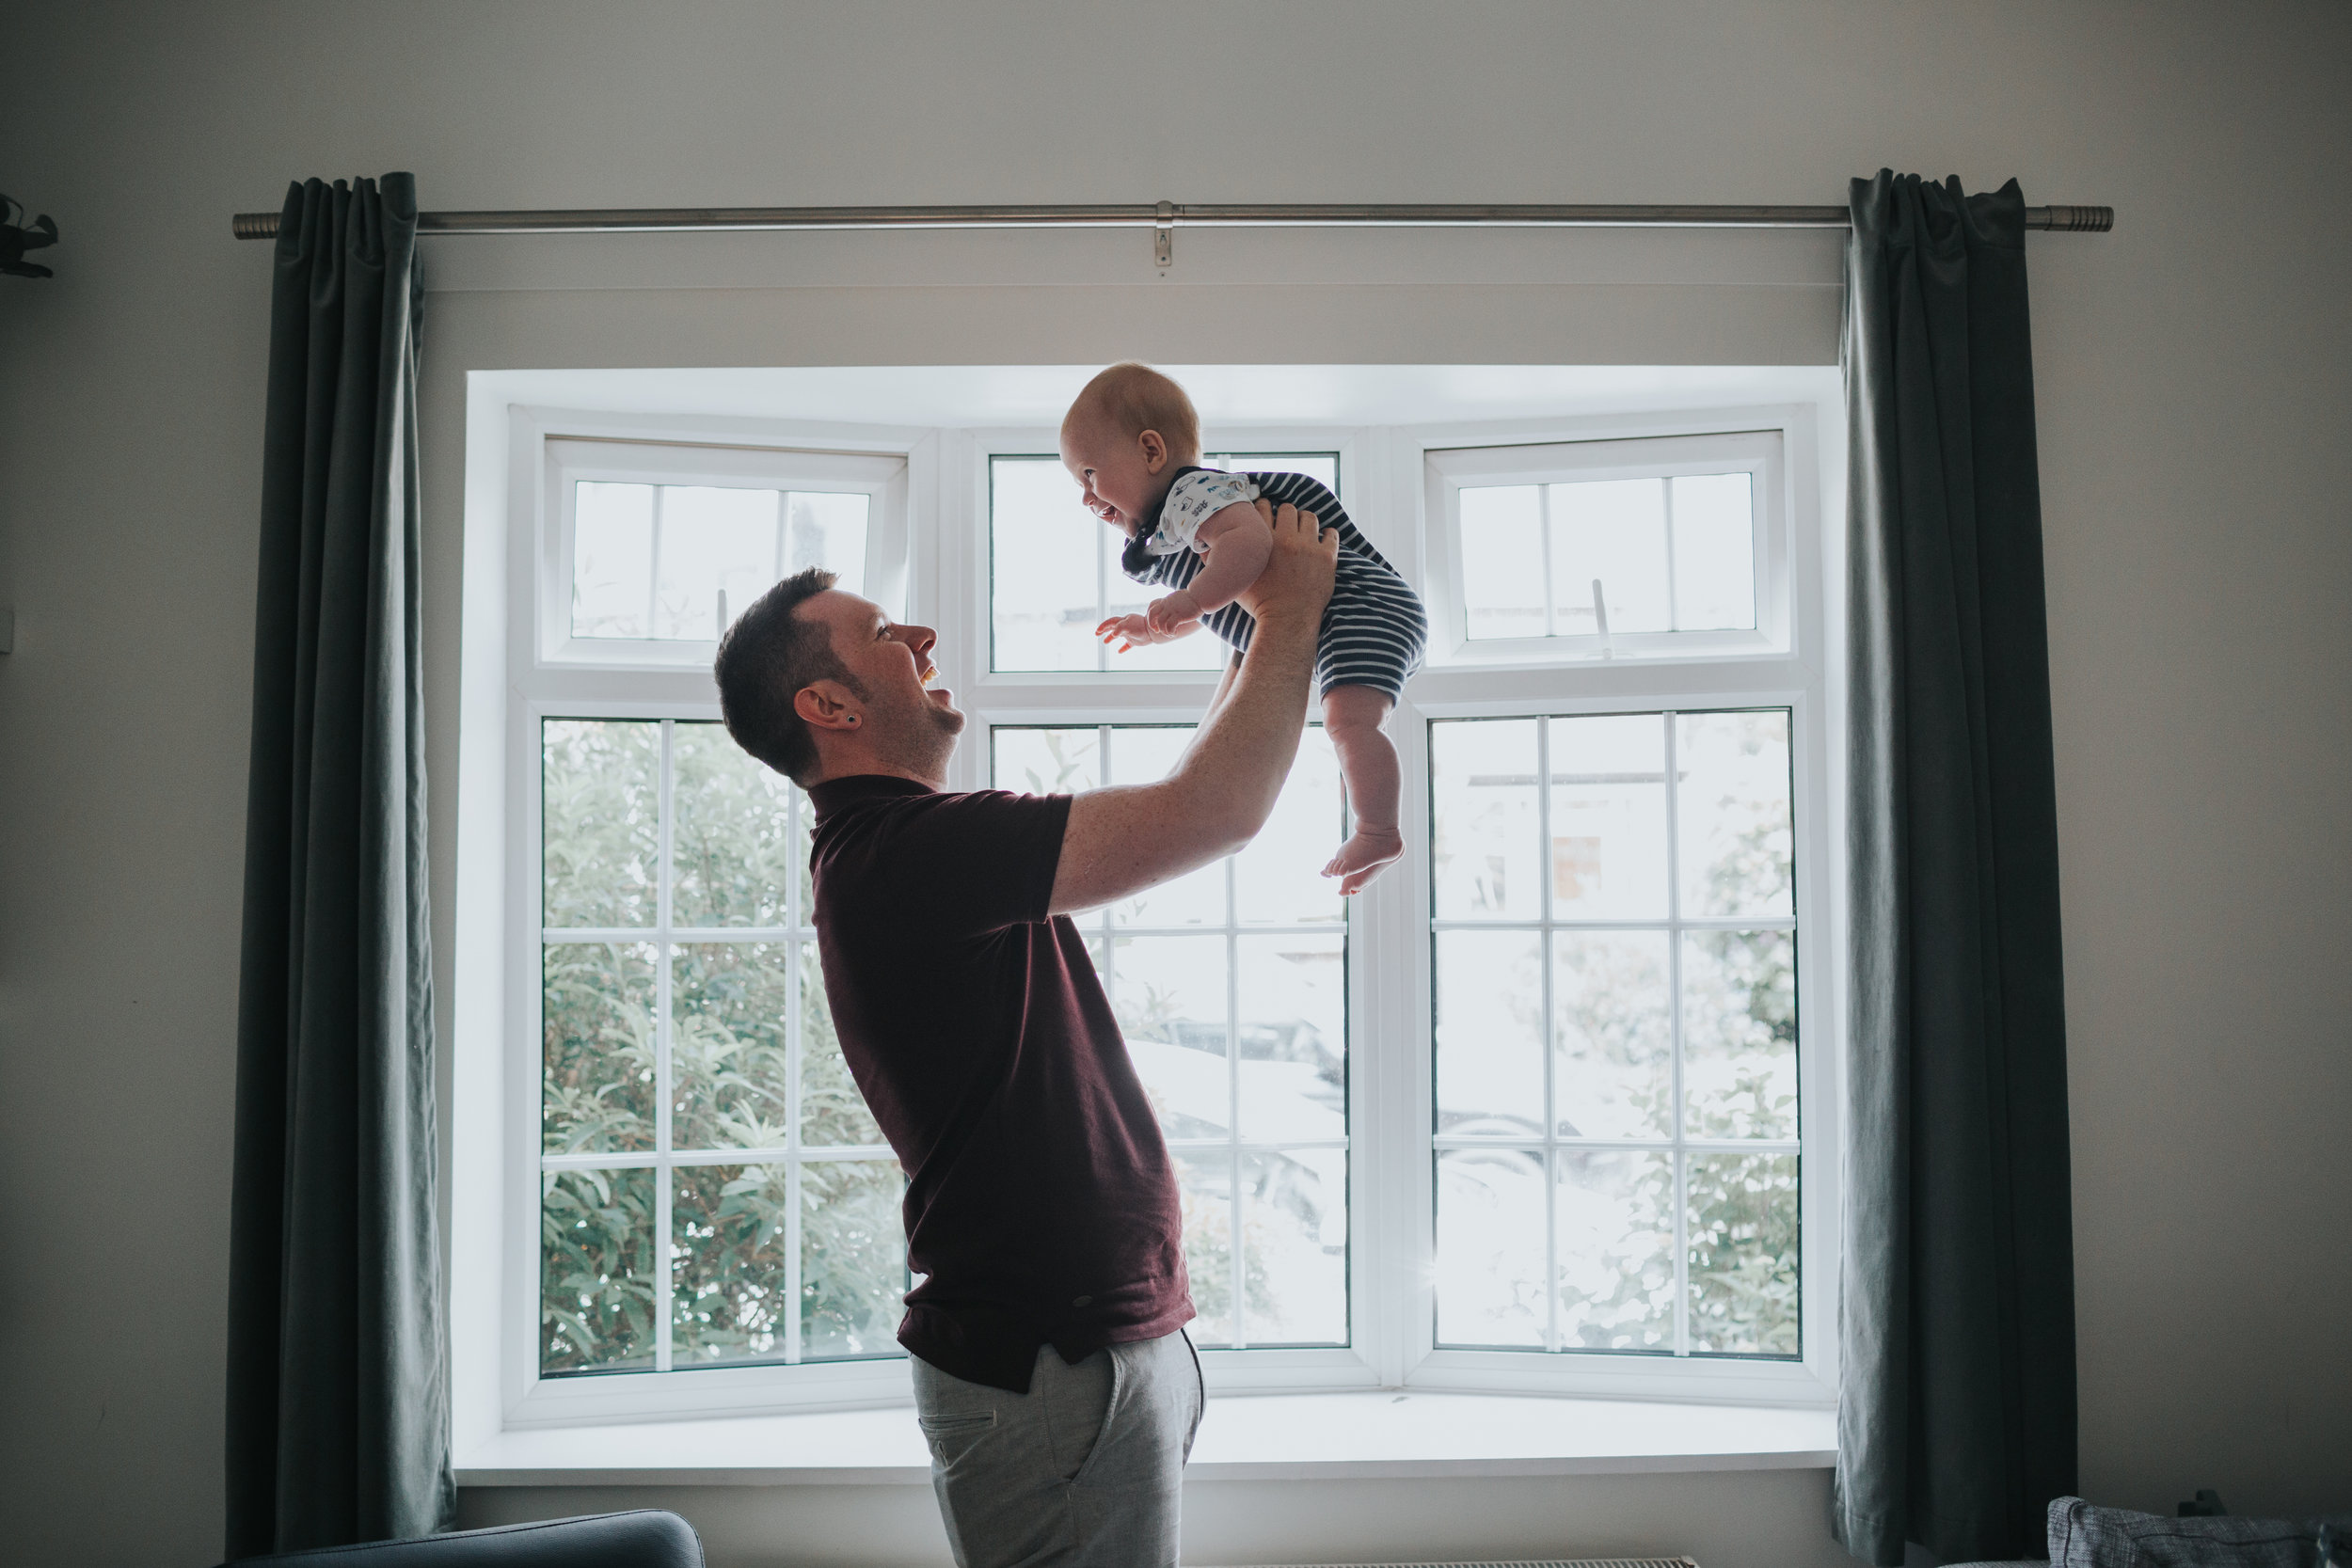 Dad chucks baby up and down in font of window to celebrate. 